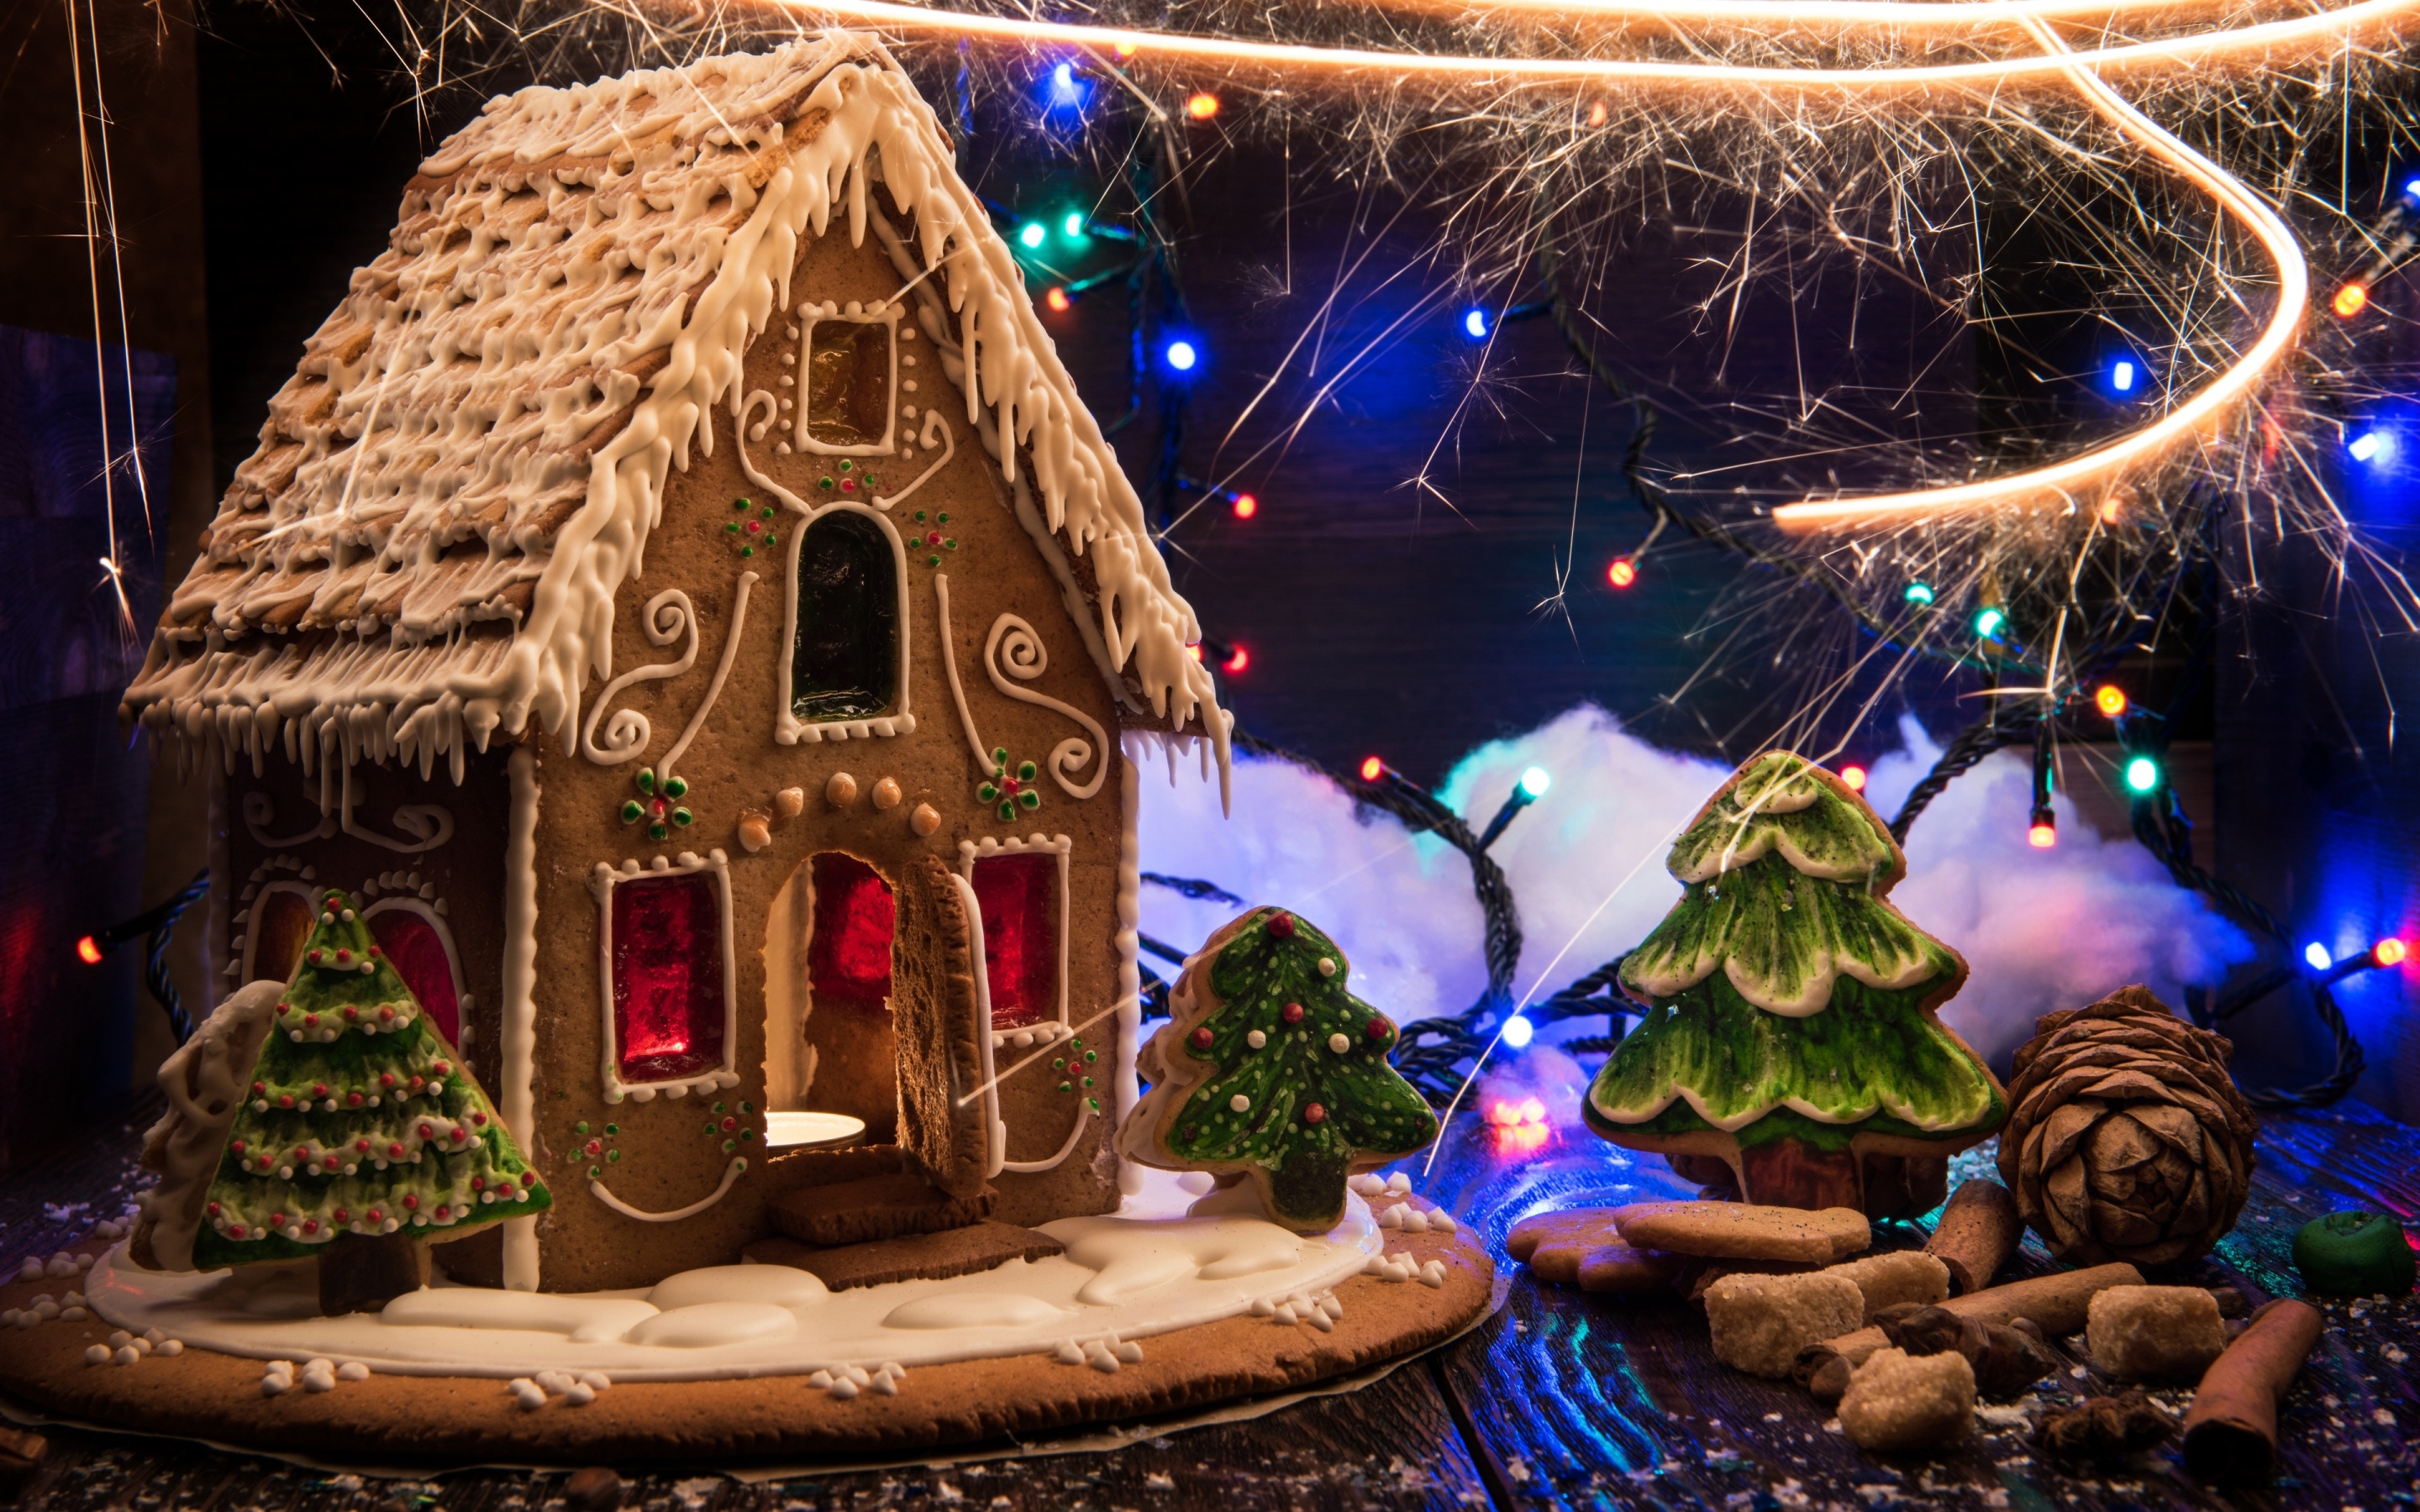 Christmas Gingerbread Decorations for 2880 x 1800 Retina Display resolution